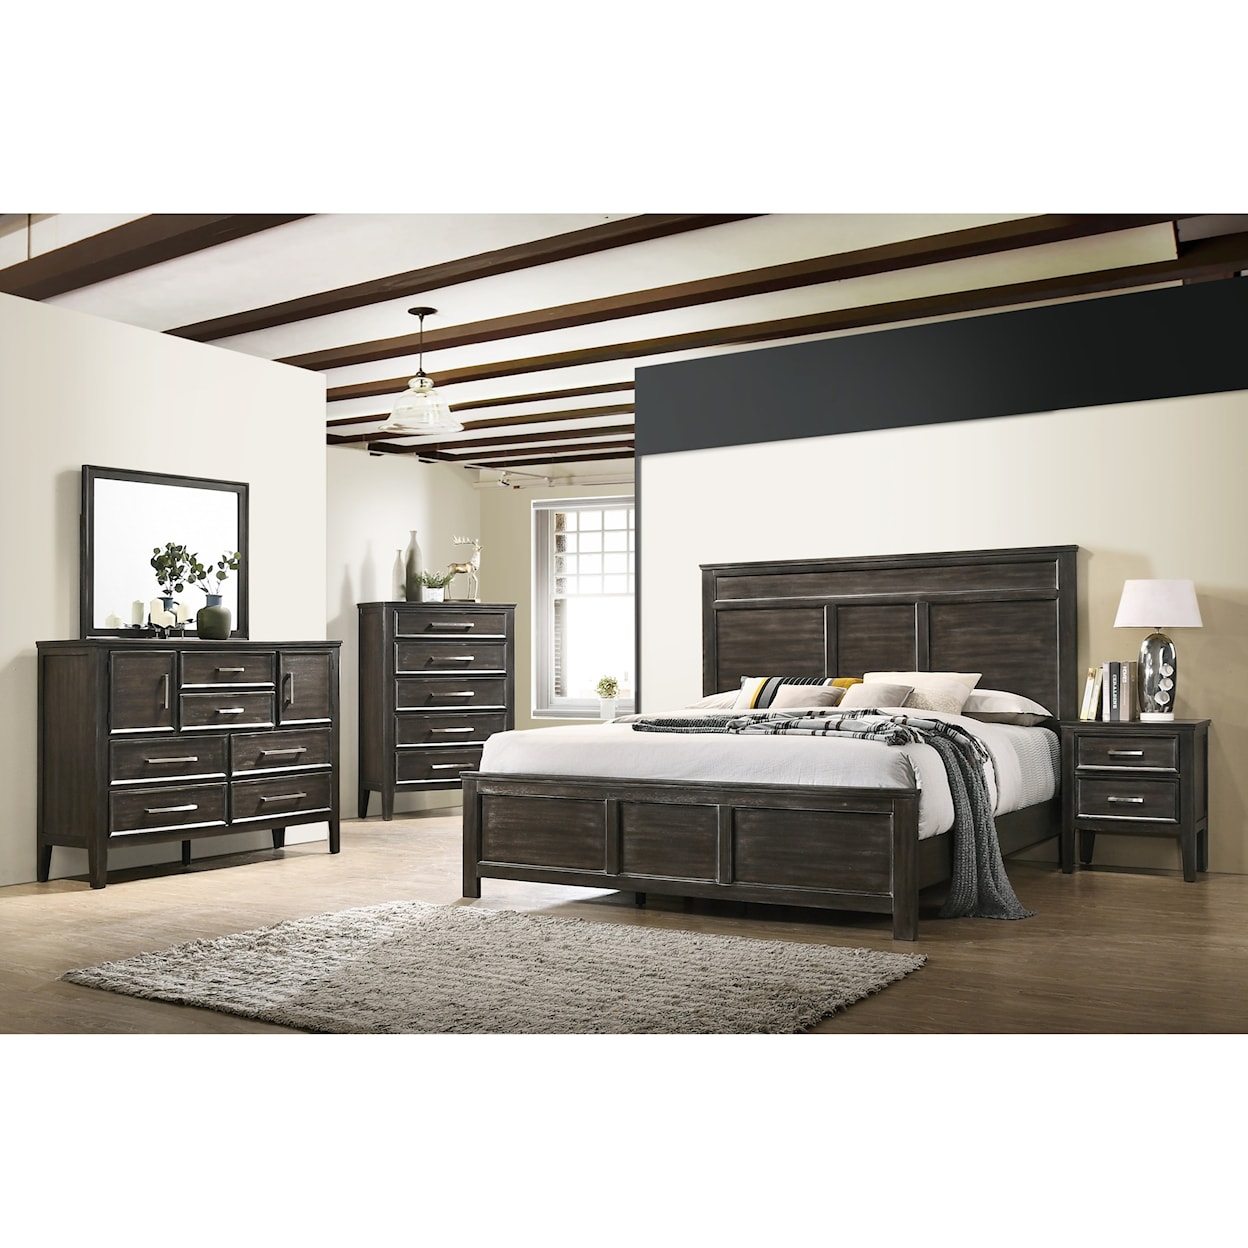 New Classic Furniture Andover King Bedroom Group